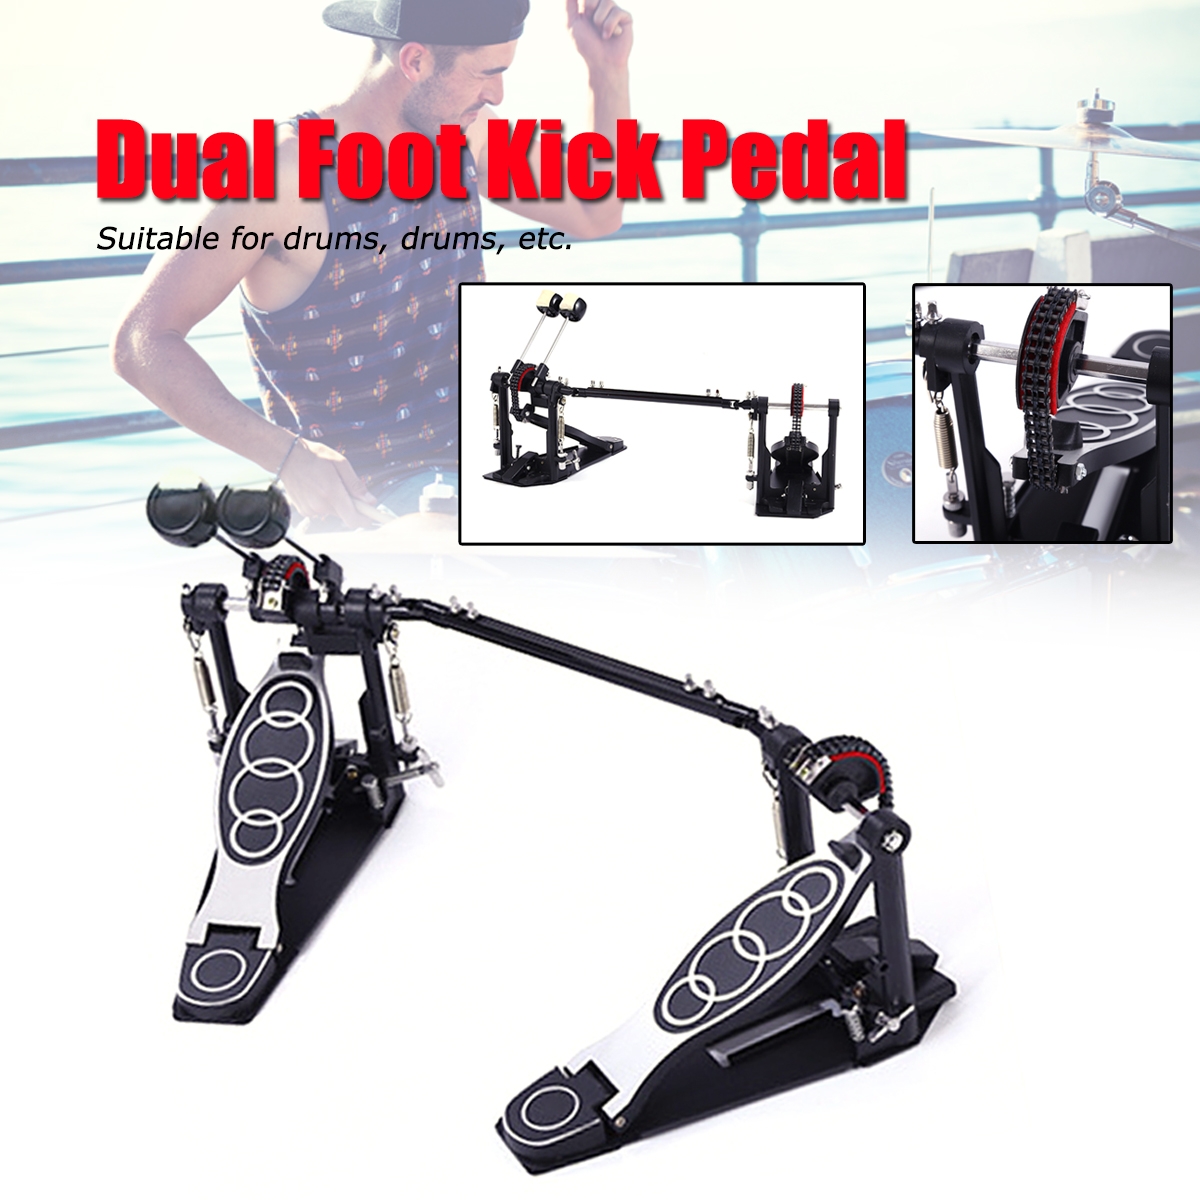 1PC Dual Foot Kick Pedal Professional Drum Pedal Double Bass Percussion Set Single Chain Drive